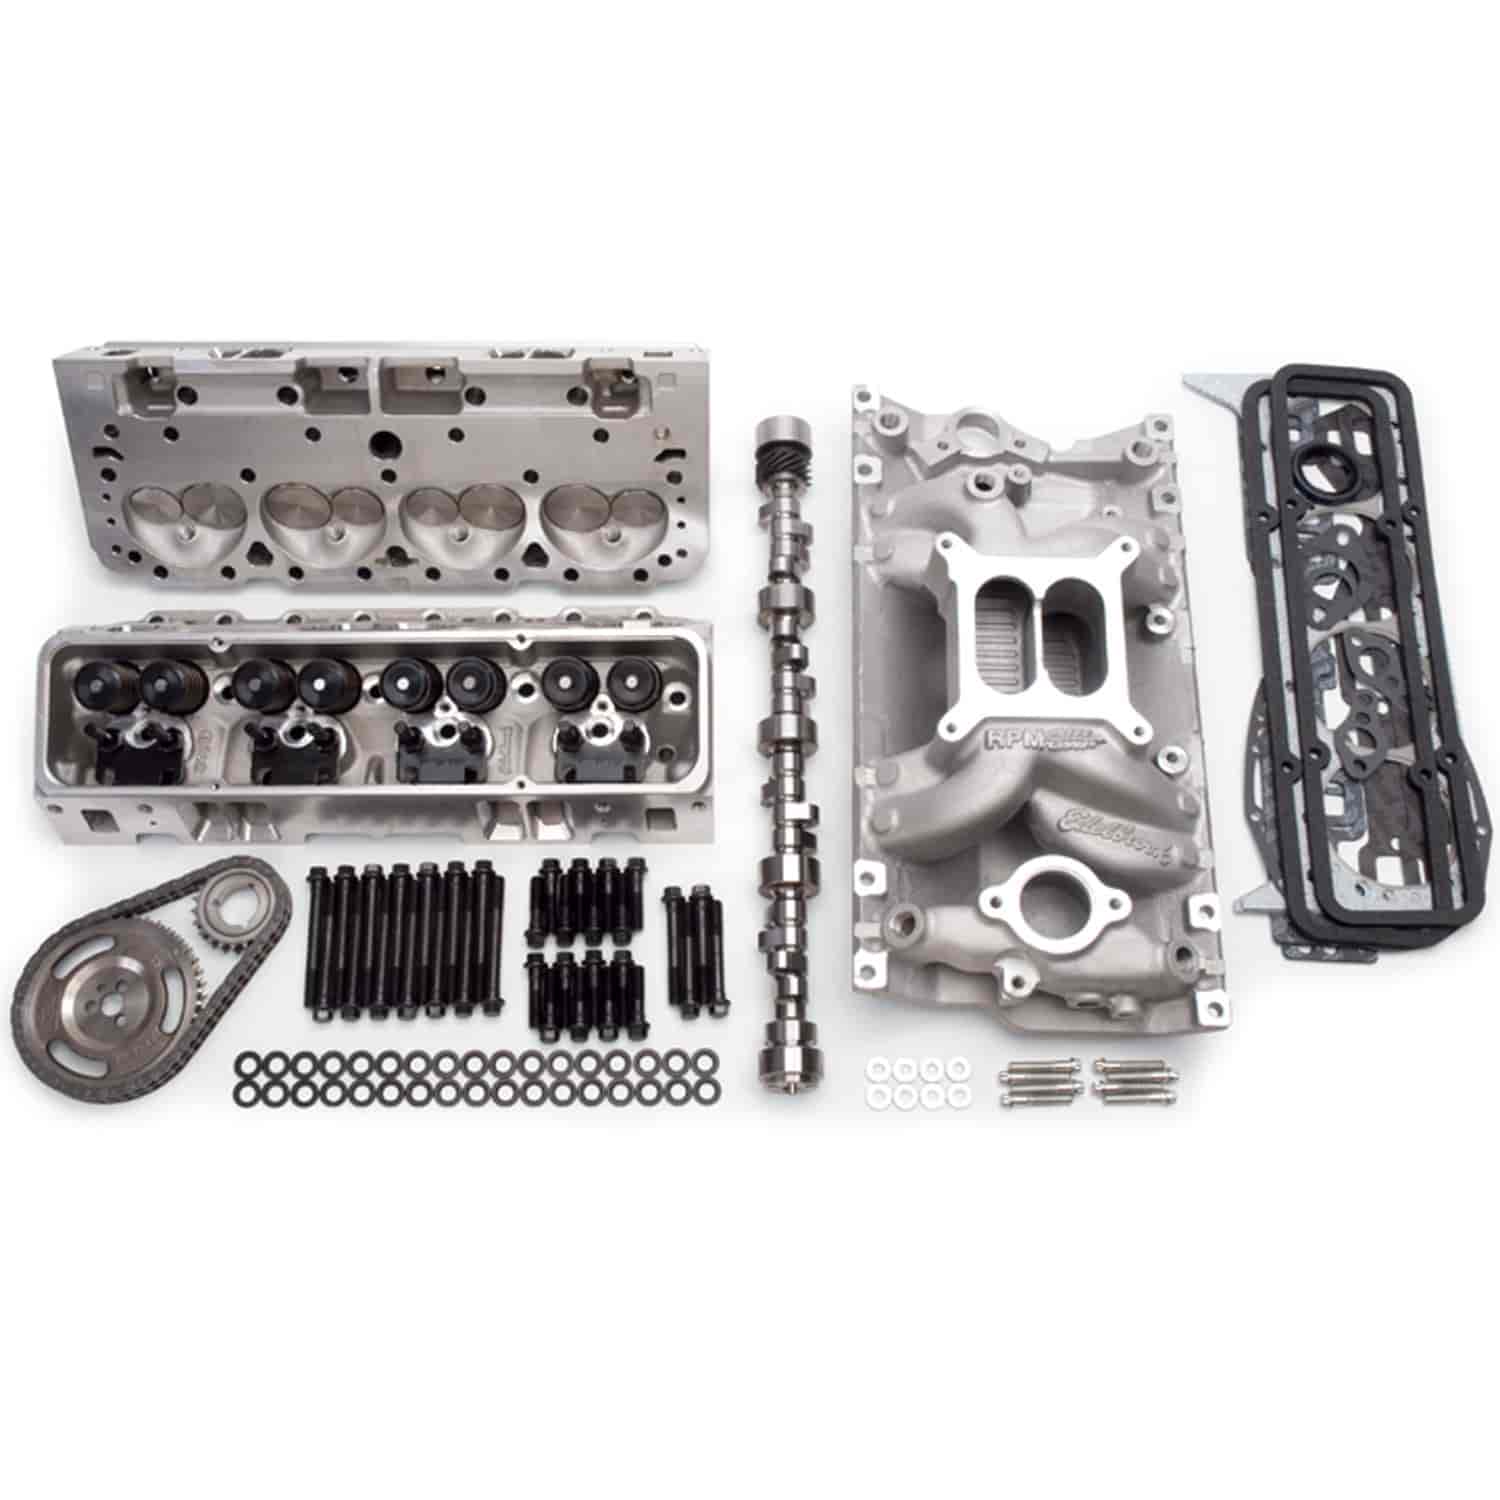 RPM Power Package Top End Kit for 1987-Later